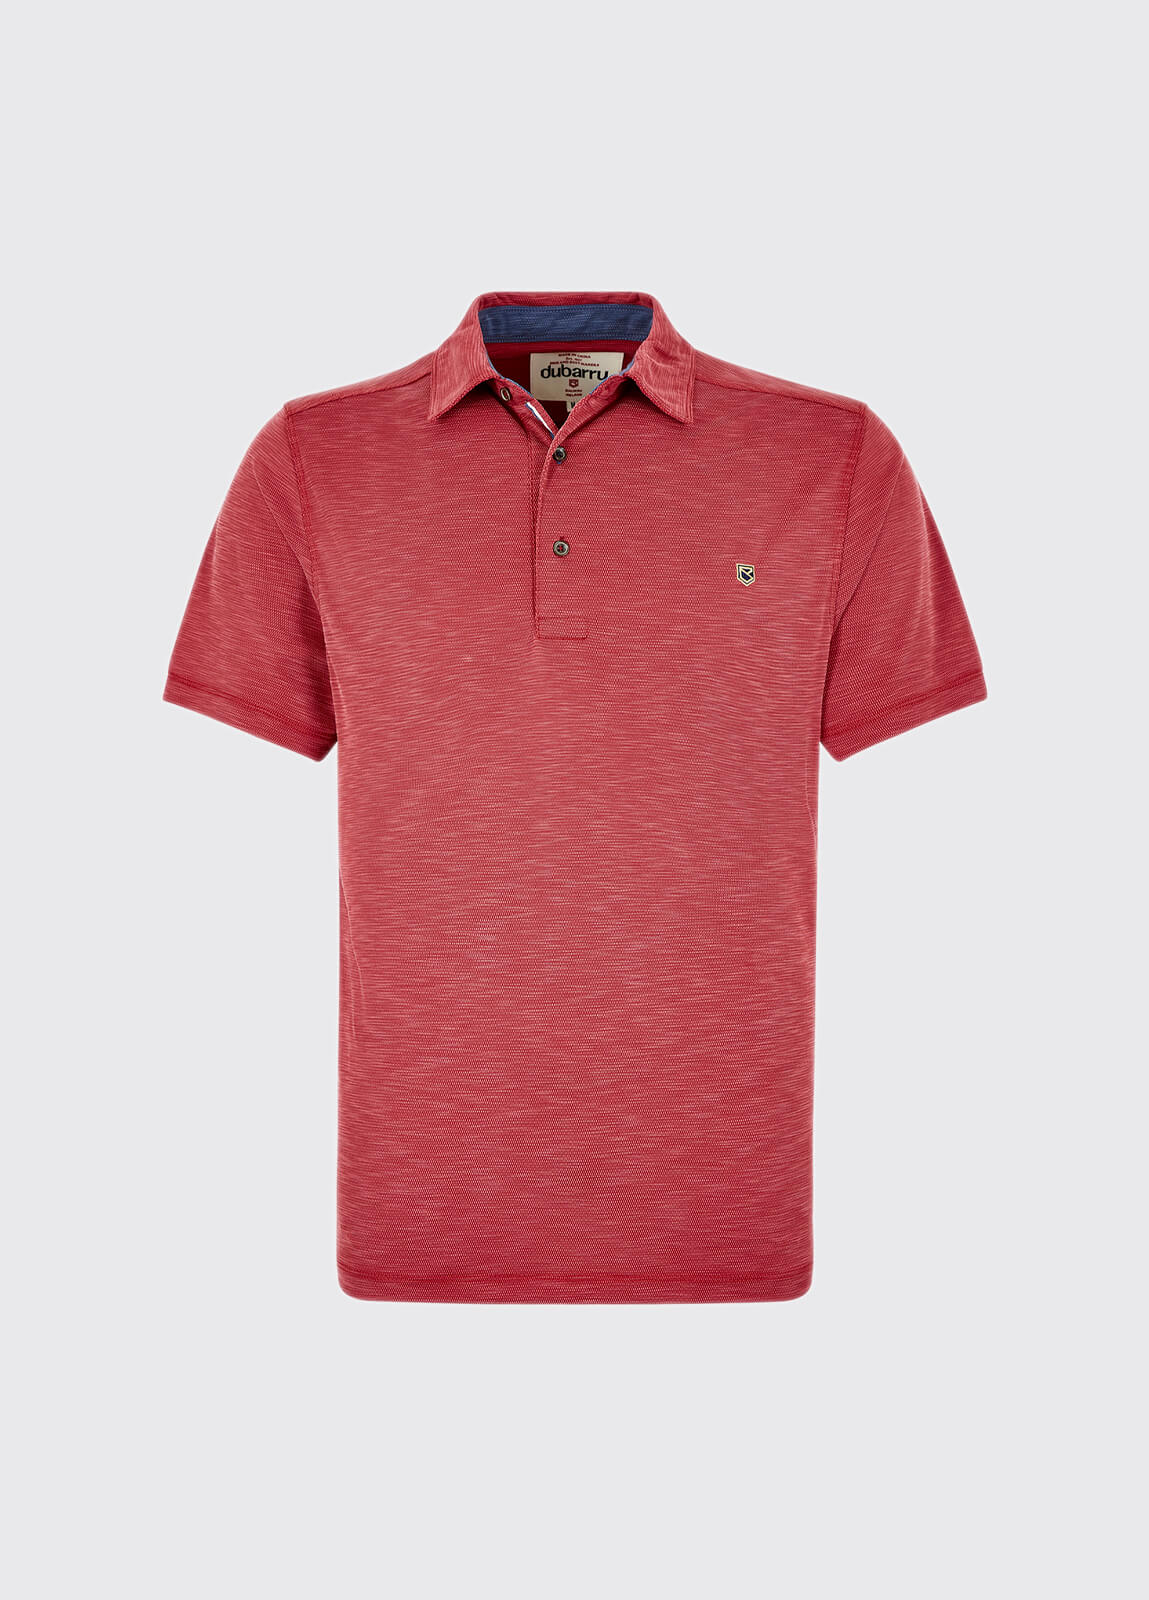 Elphin Polo Shirt - Ruby Red